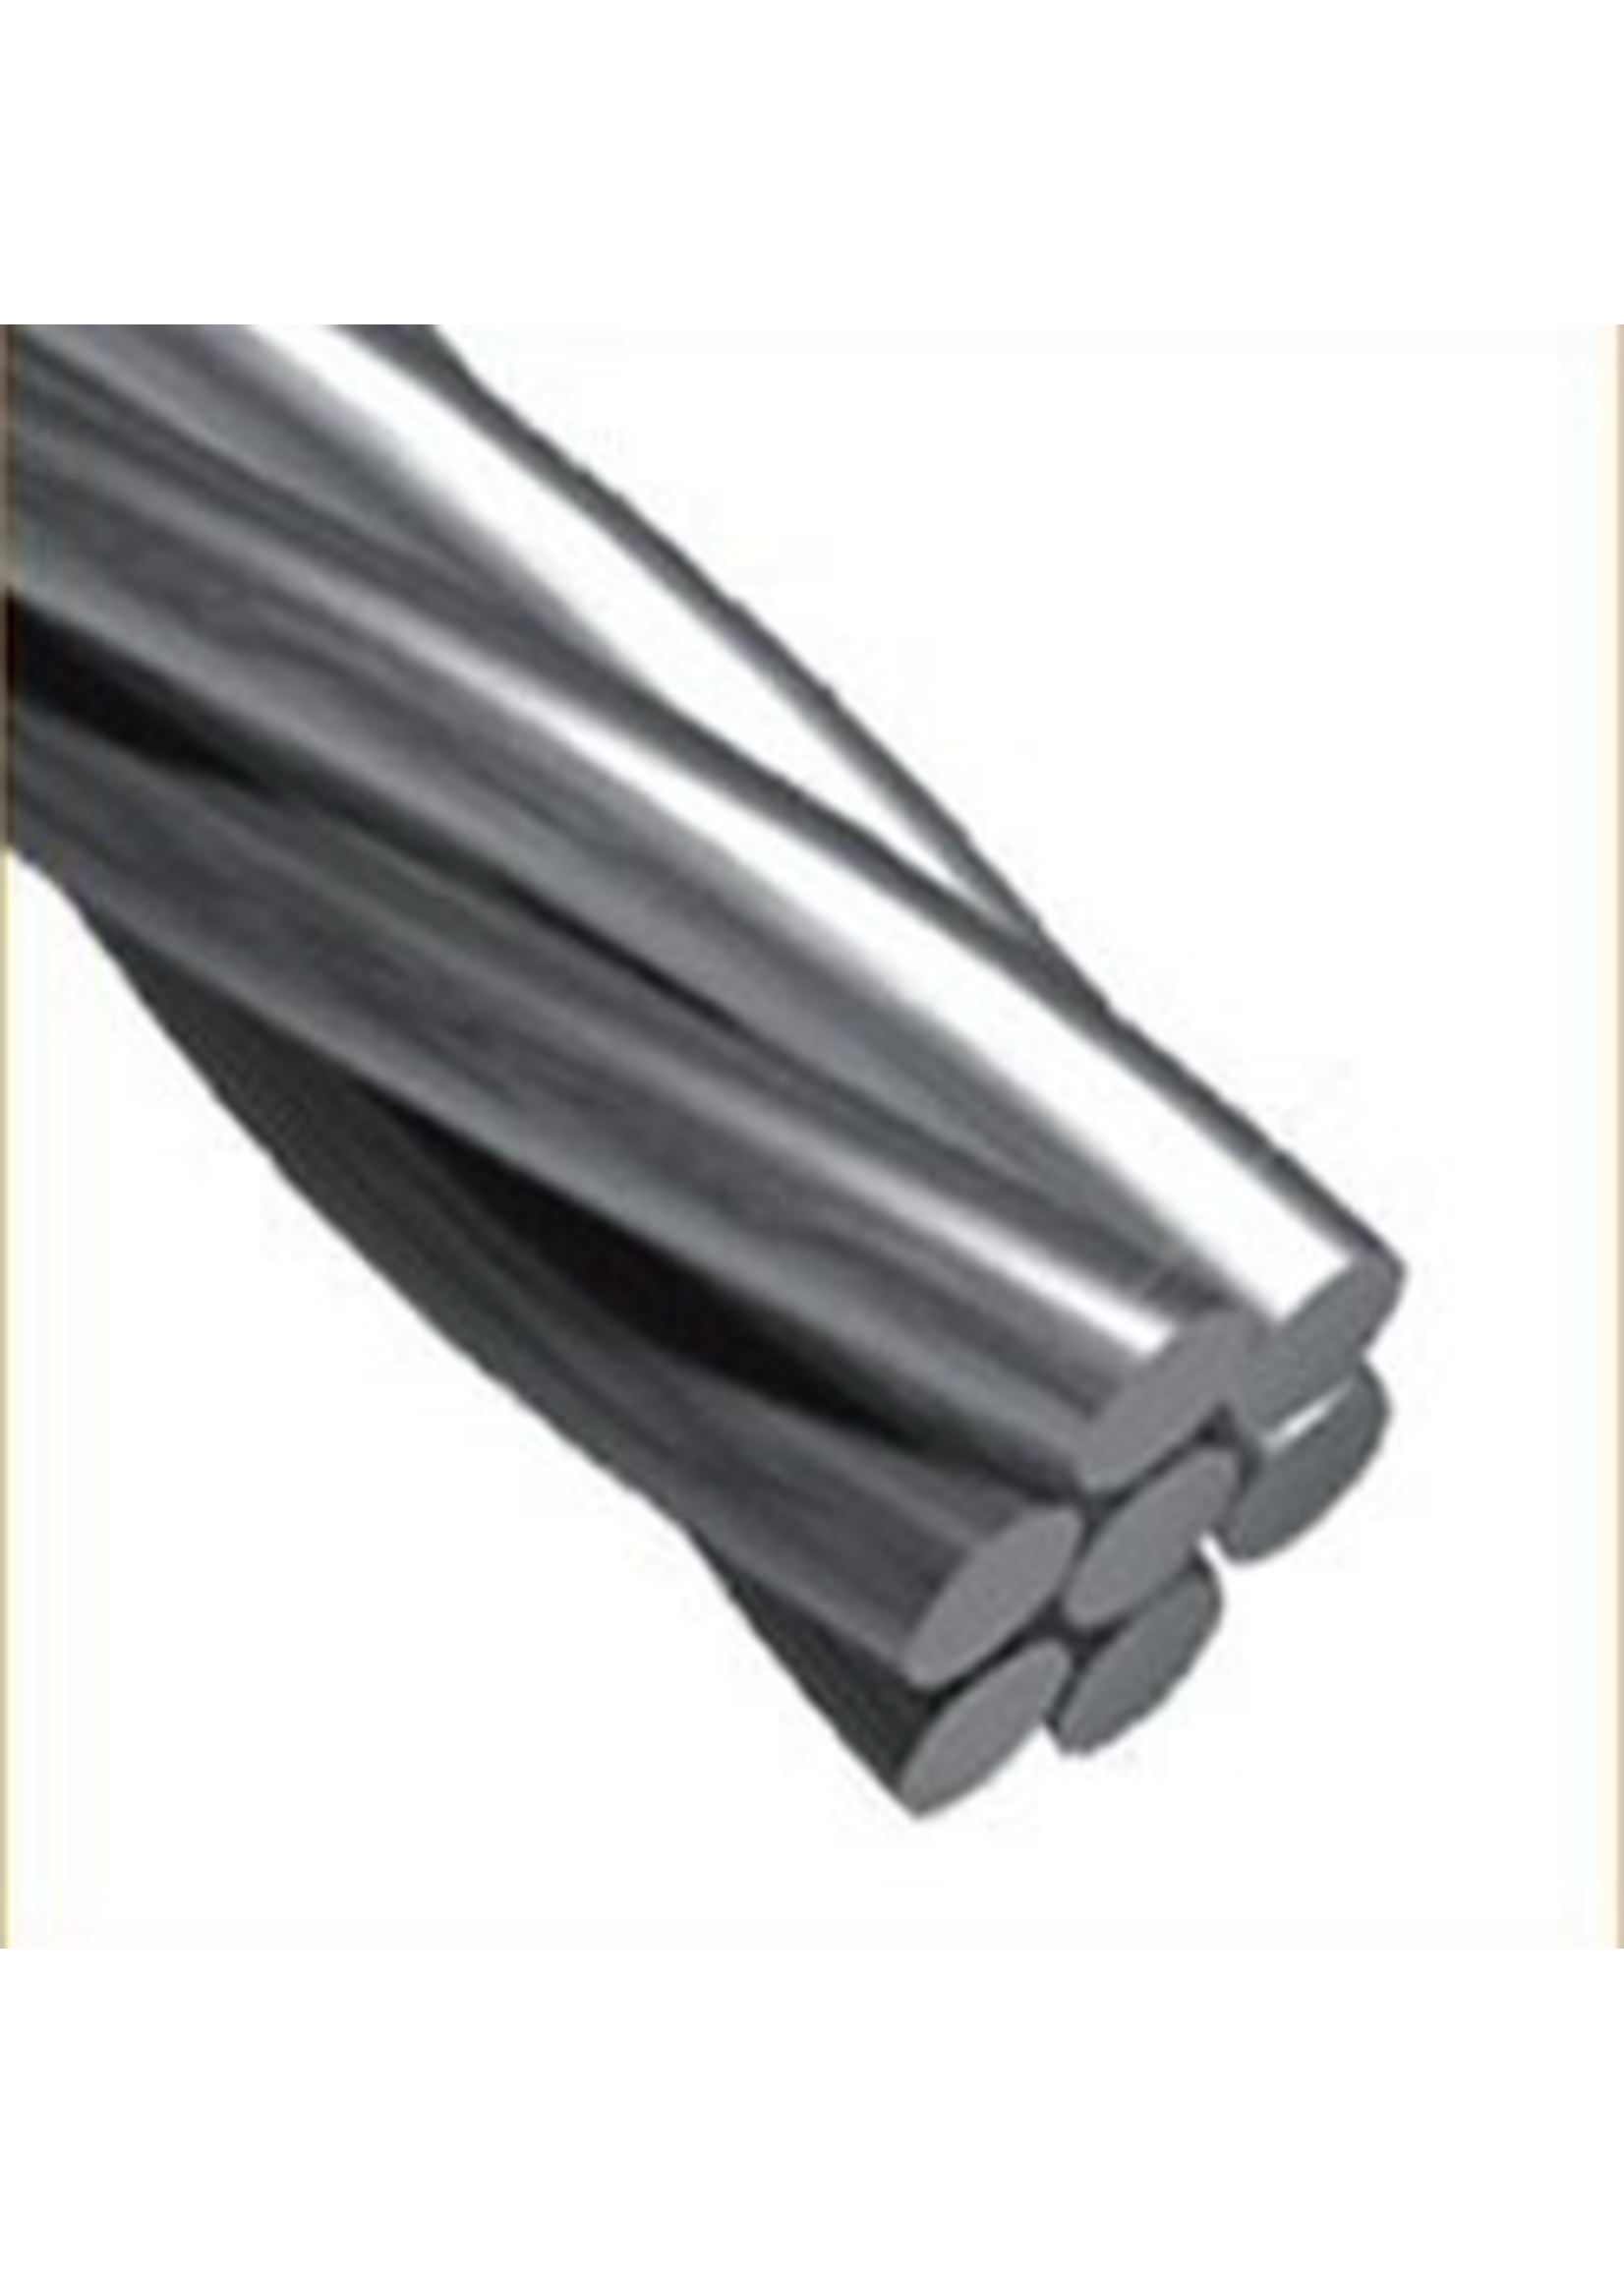 Fehr Bros. Cable Common Grade 1/4" X 250' MBS 1900#